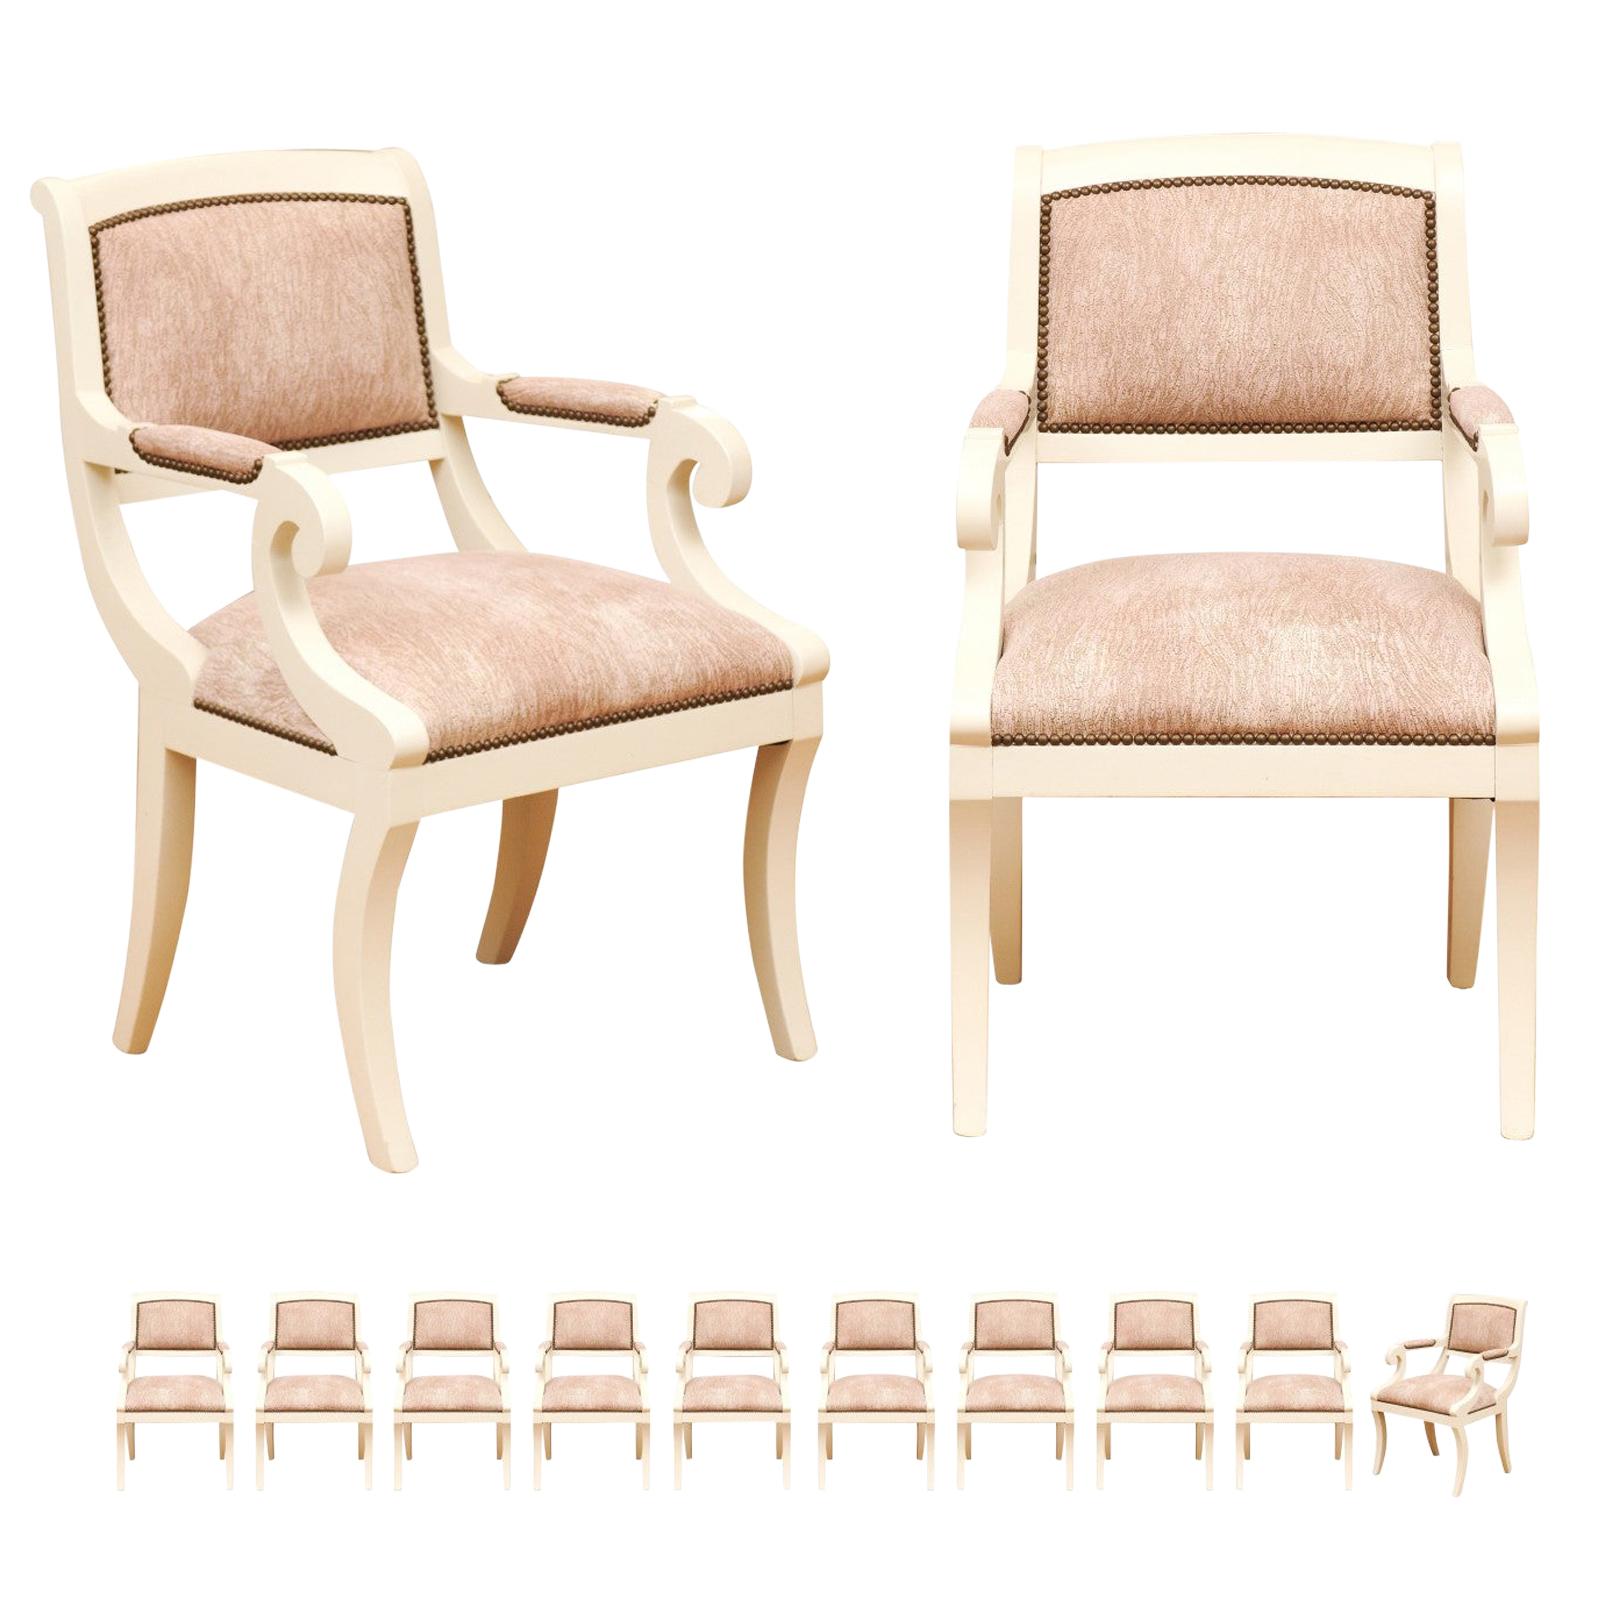 Sophisticated Set of 12 Modern Regency Style Klismos Chairs, Italy, circa 1970 For Sale